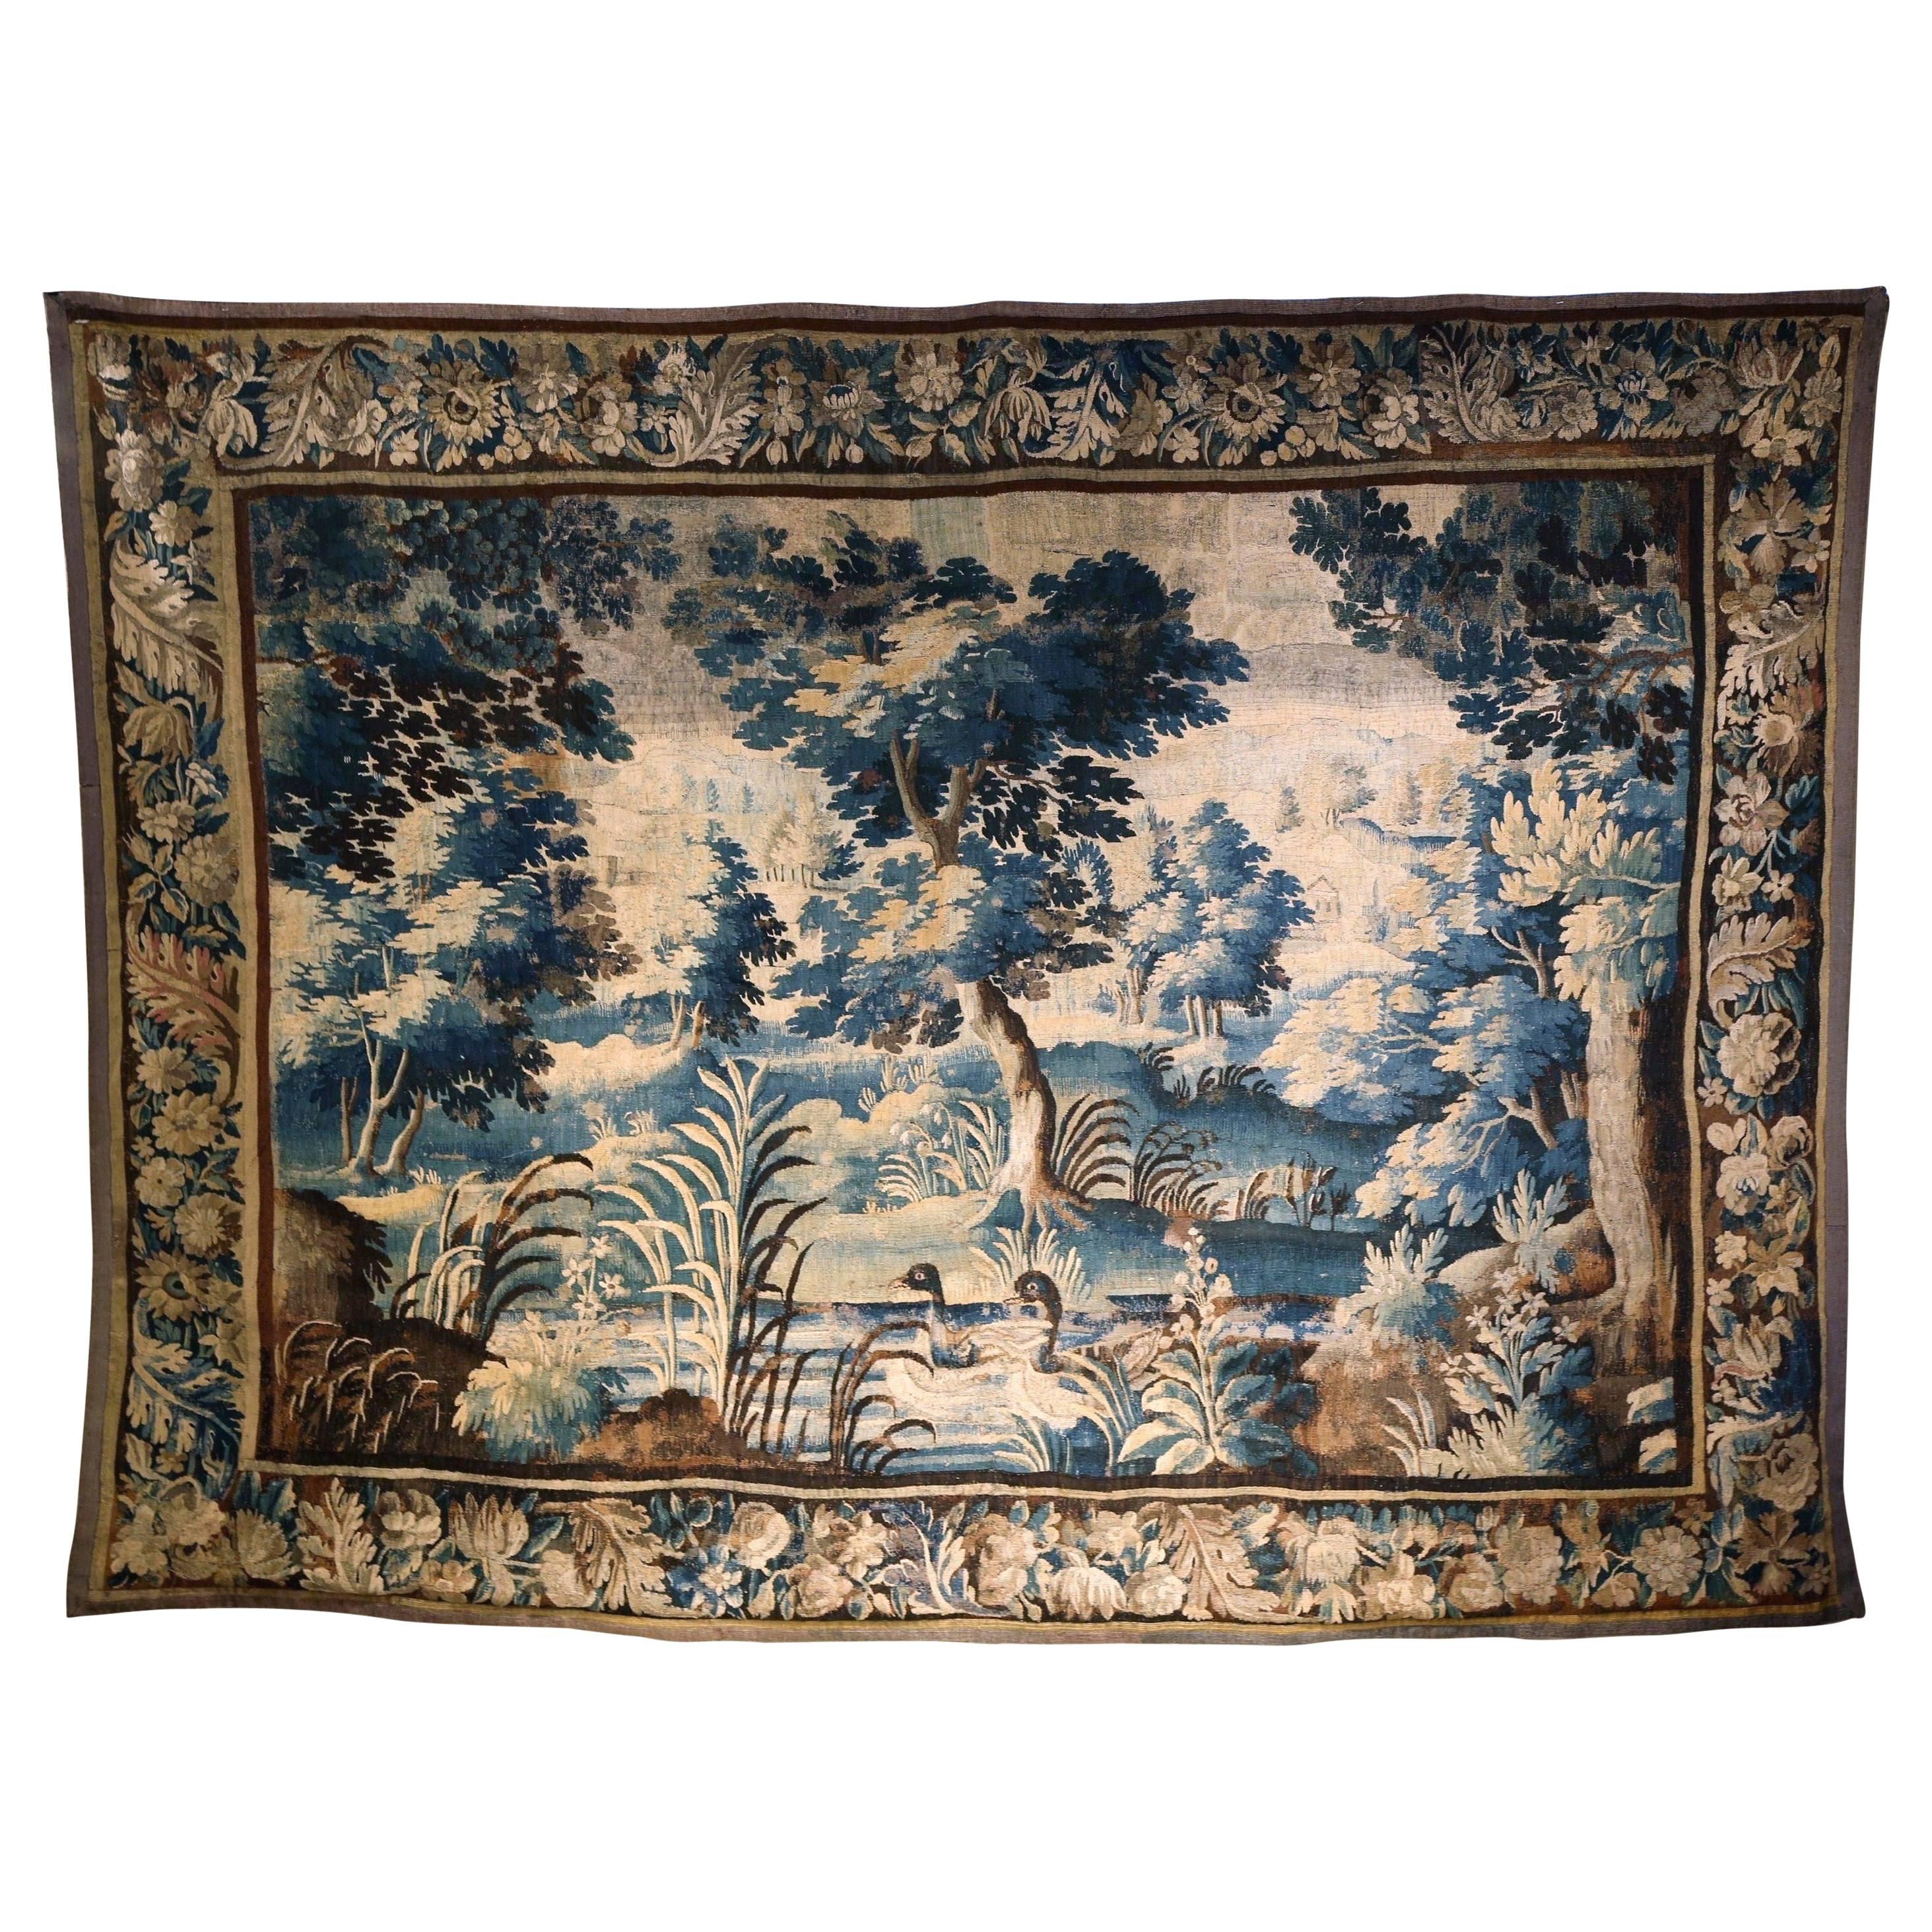 18th Century French "Verdure" Aubusson Tapestry with Ducks Pond and Trees